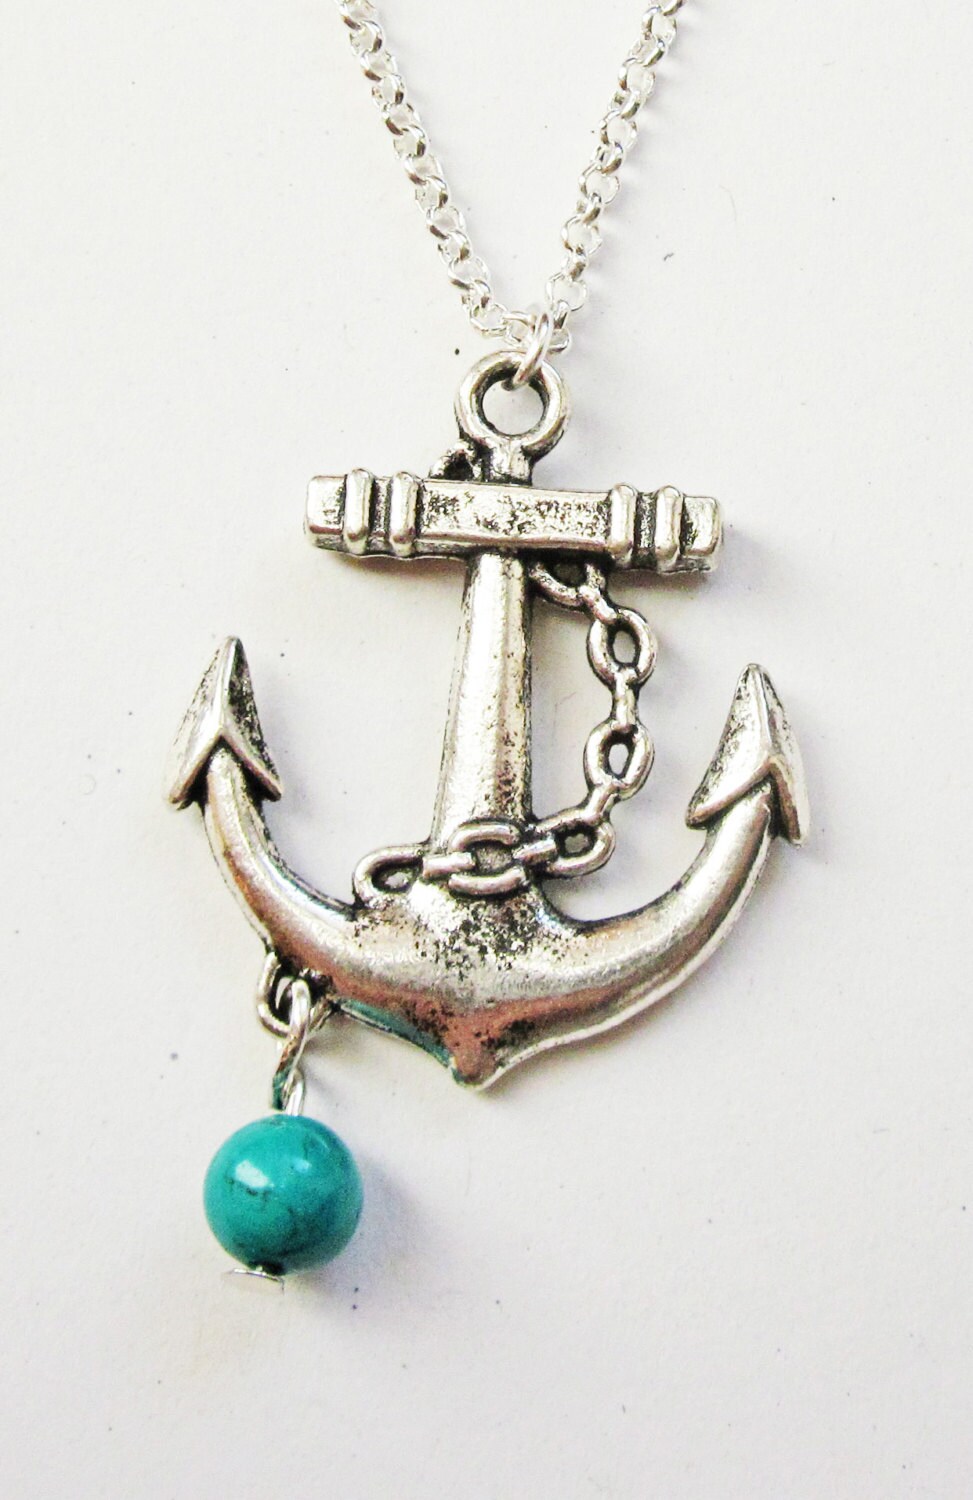 Anchor Dainty Necklace Anchor Jewelry / Gift for Her Under | Etsy